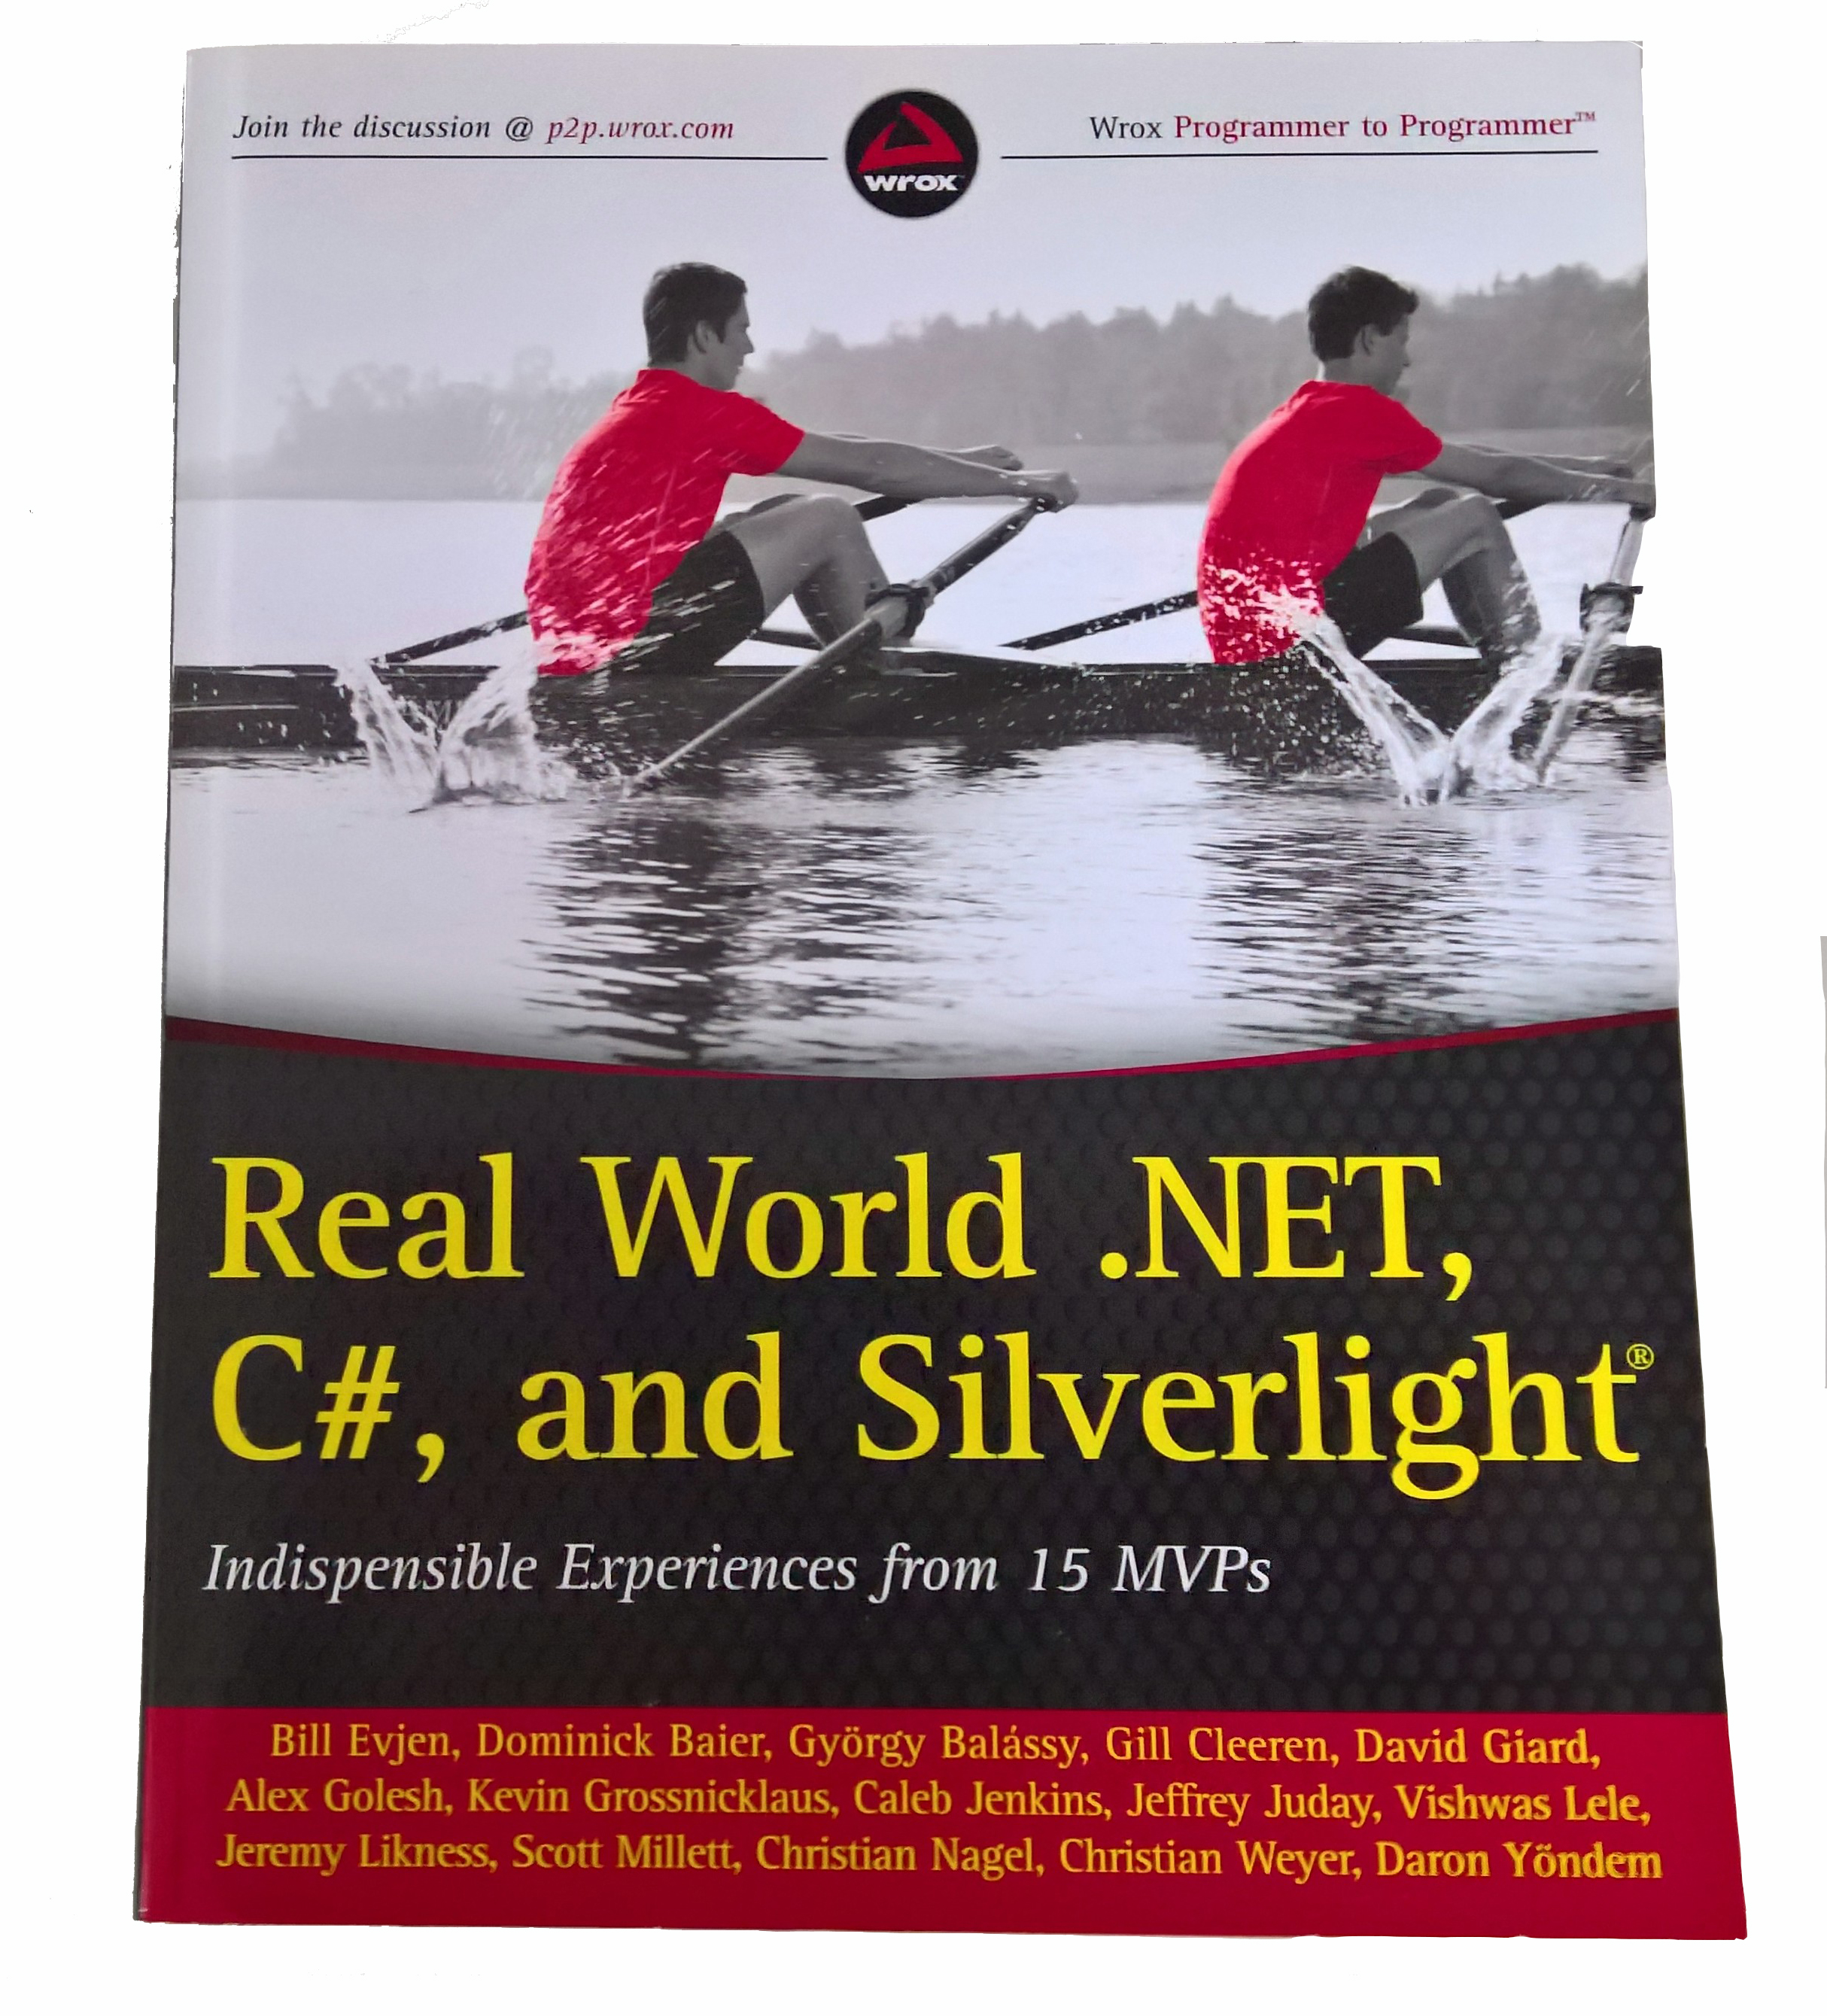 Real World .NET, C#, and Silverlight